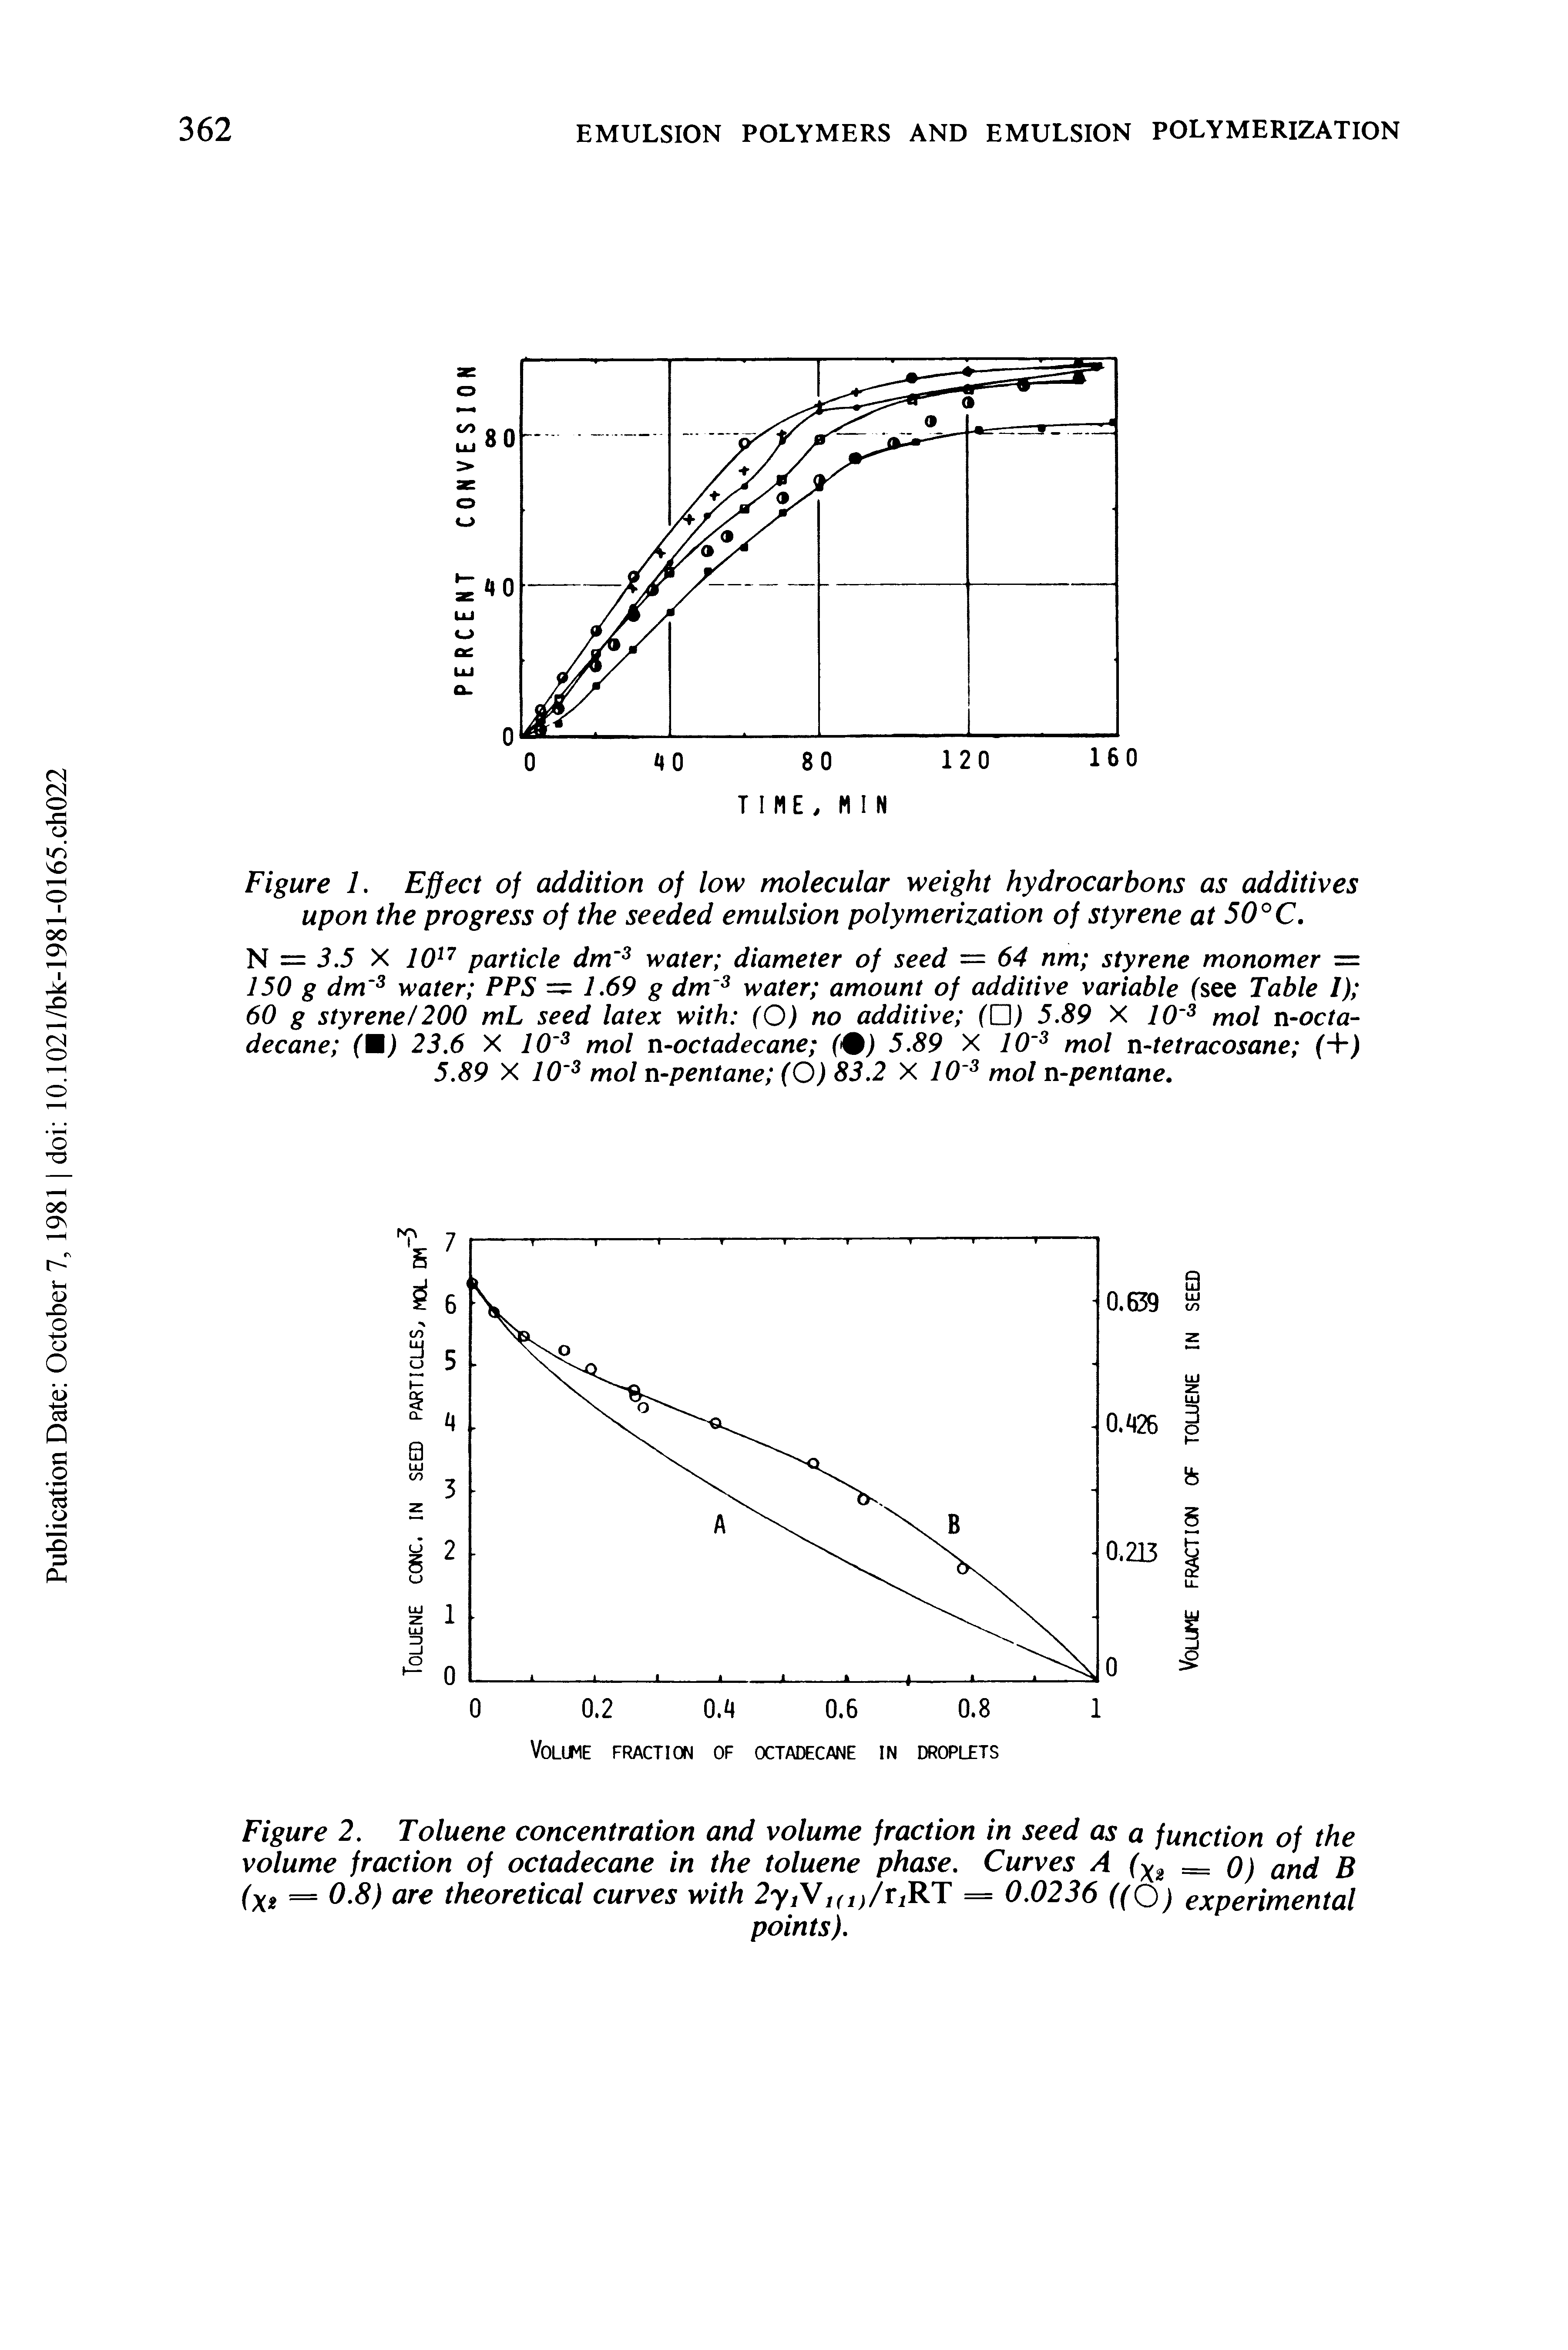 Figure 1. Effect of addition of low molecular weight hydrocarbons as additives upon the progress of the seeded emulsion polymerization of styrene at 50°C.